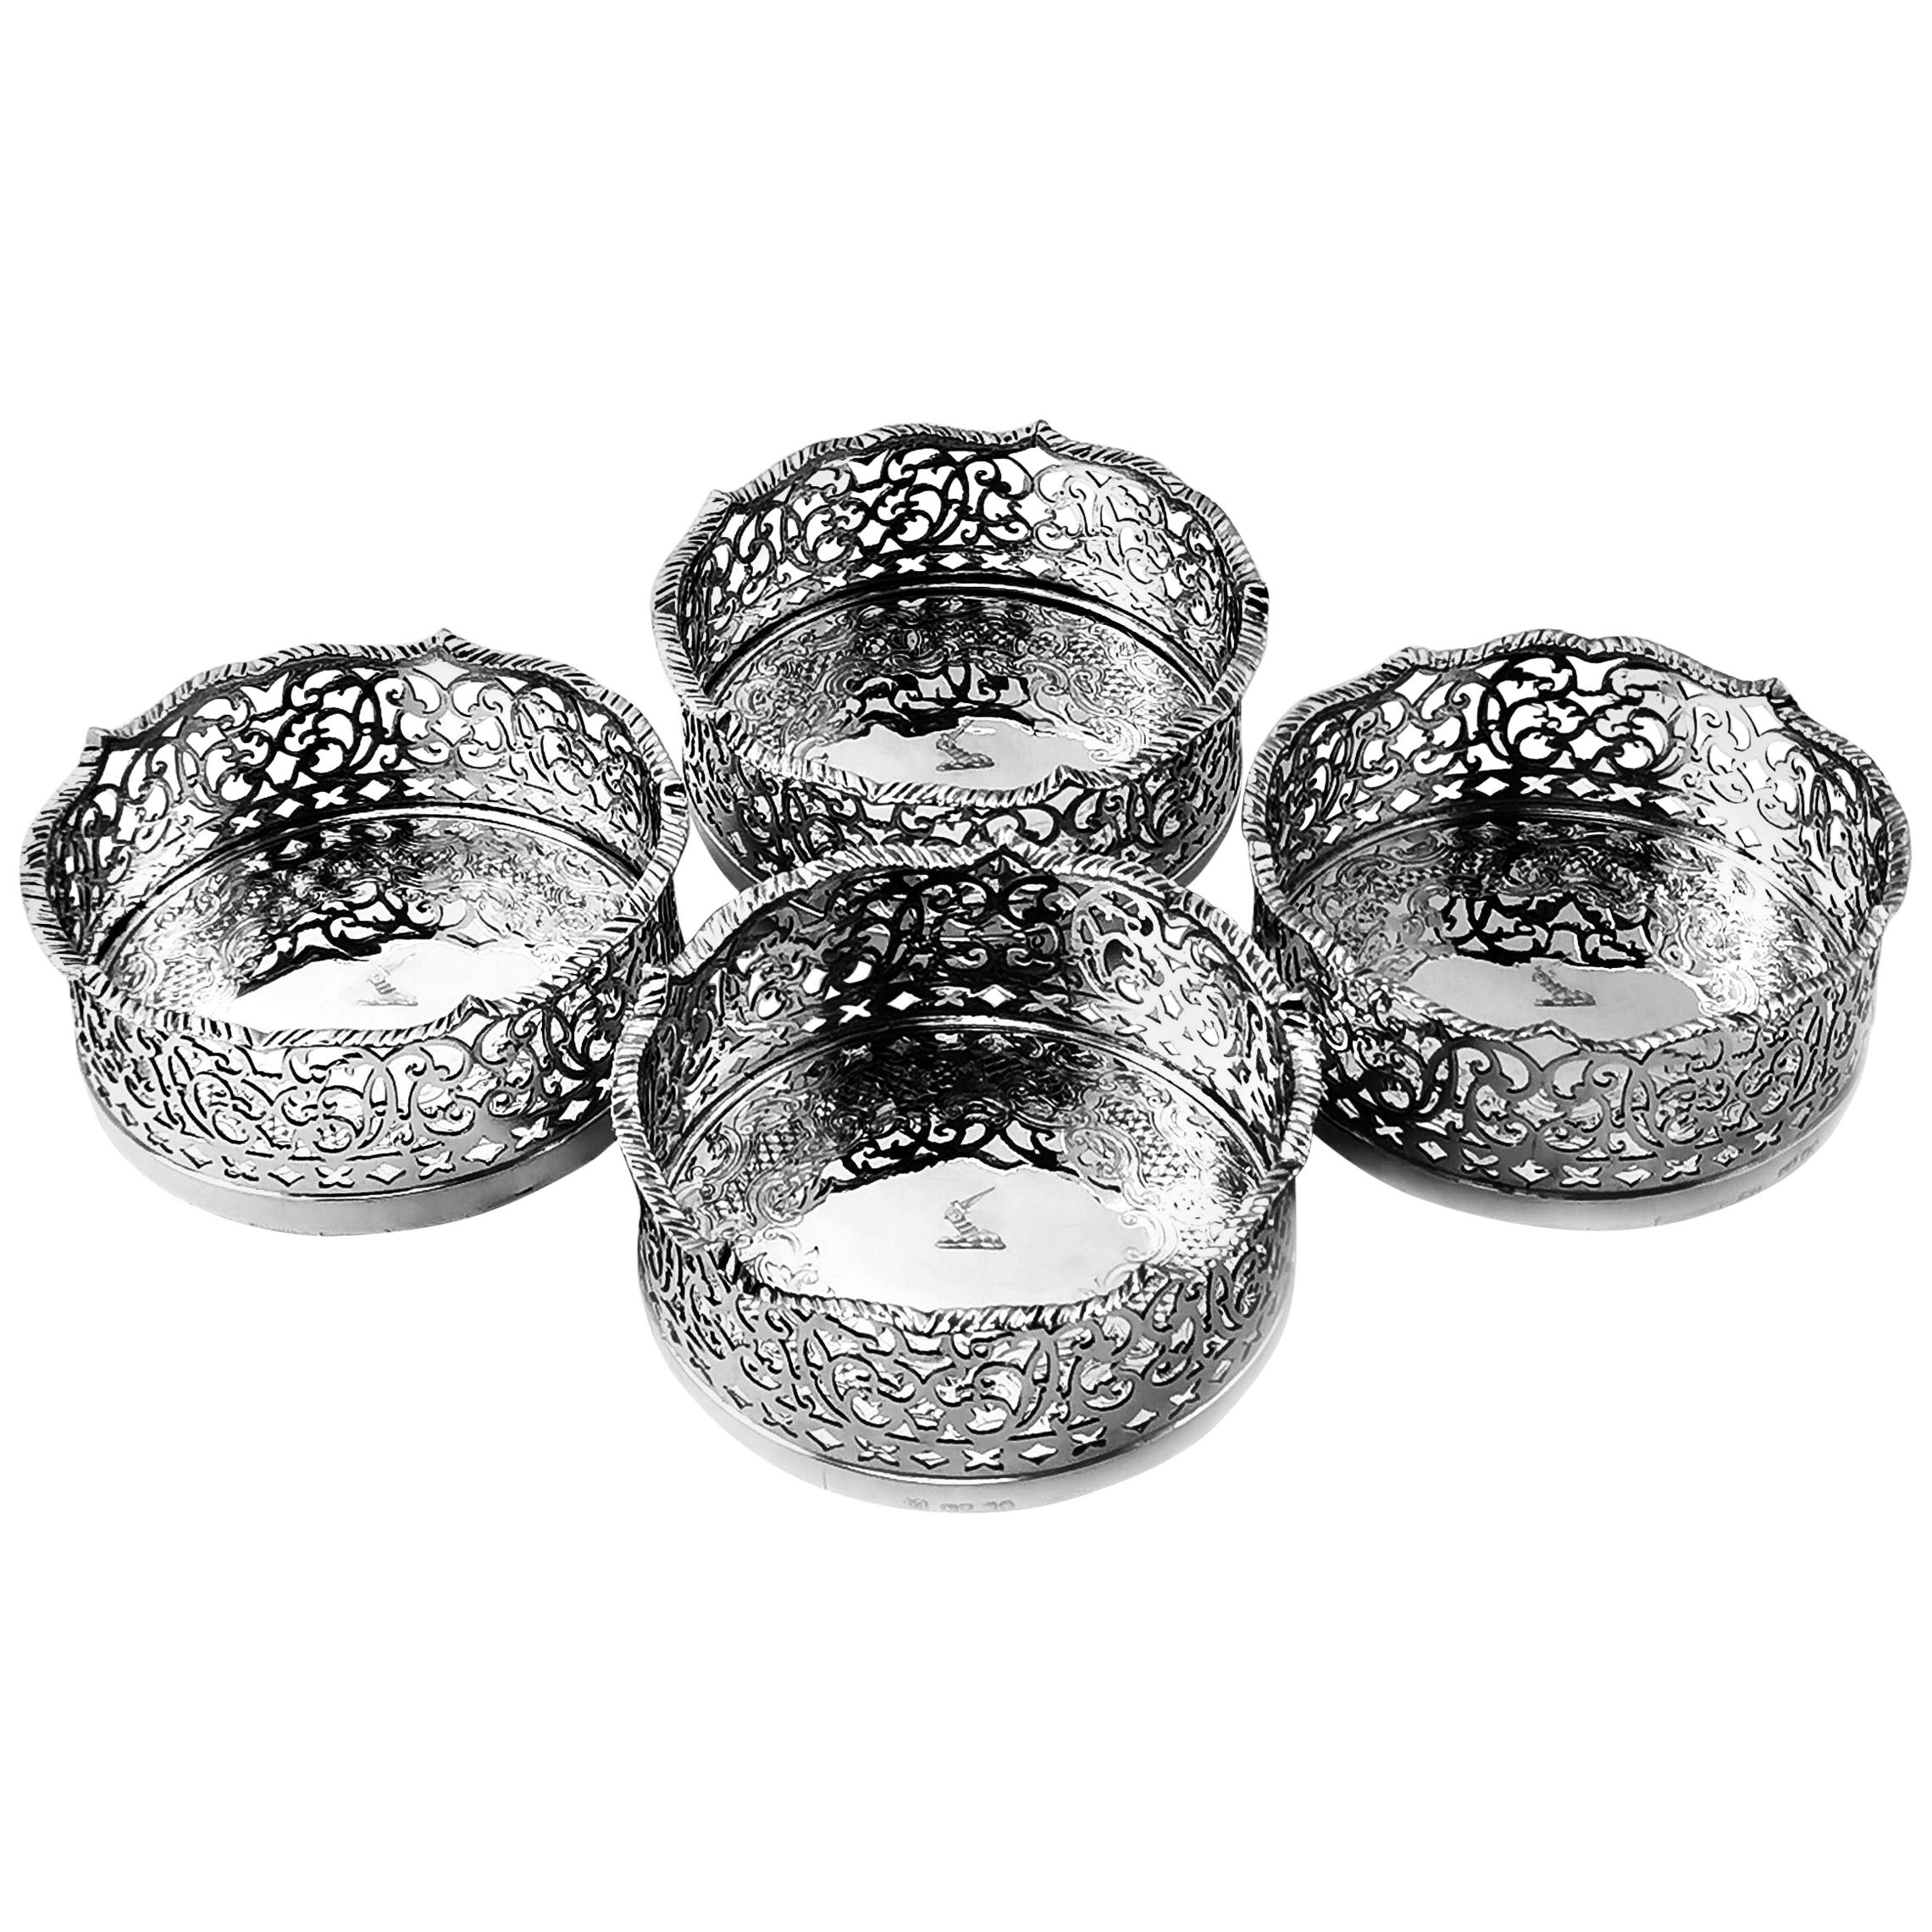 Set of 4 Antique Victorian Sterling Silver Wine Bottle Coasters, 1840